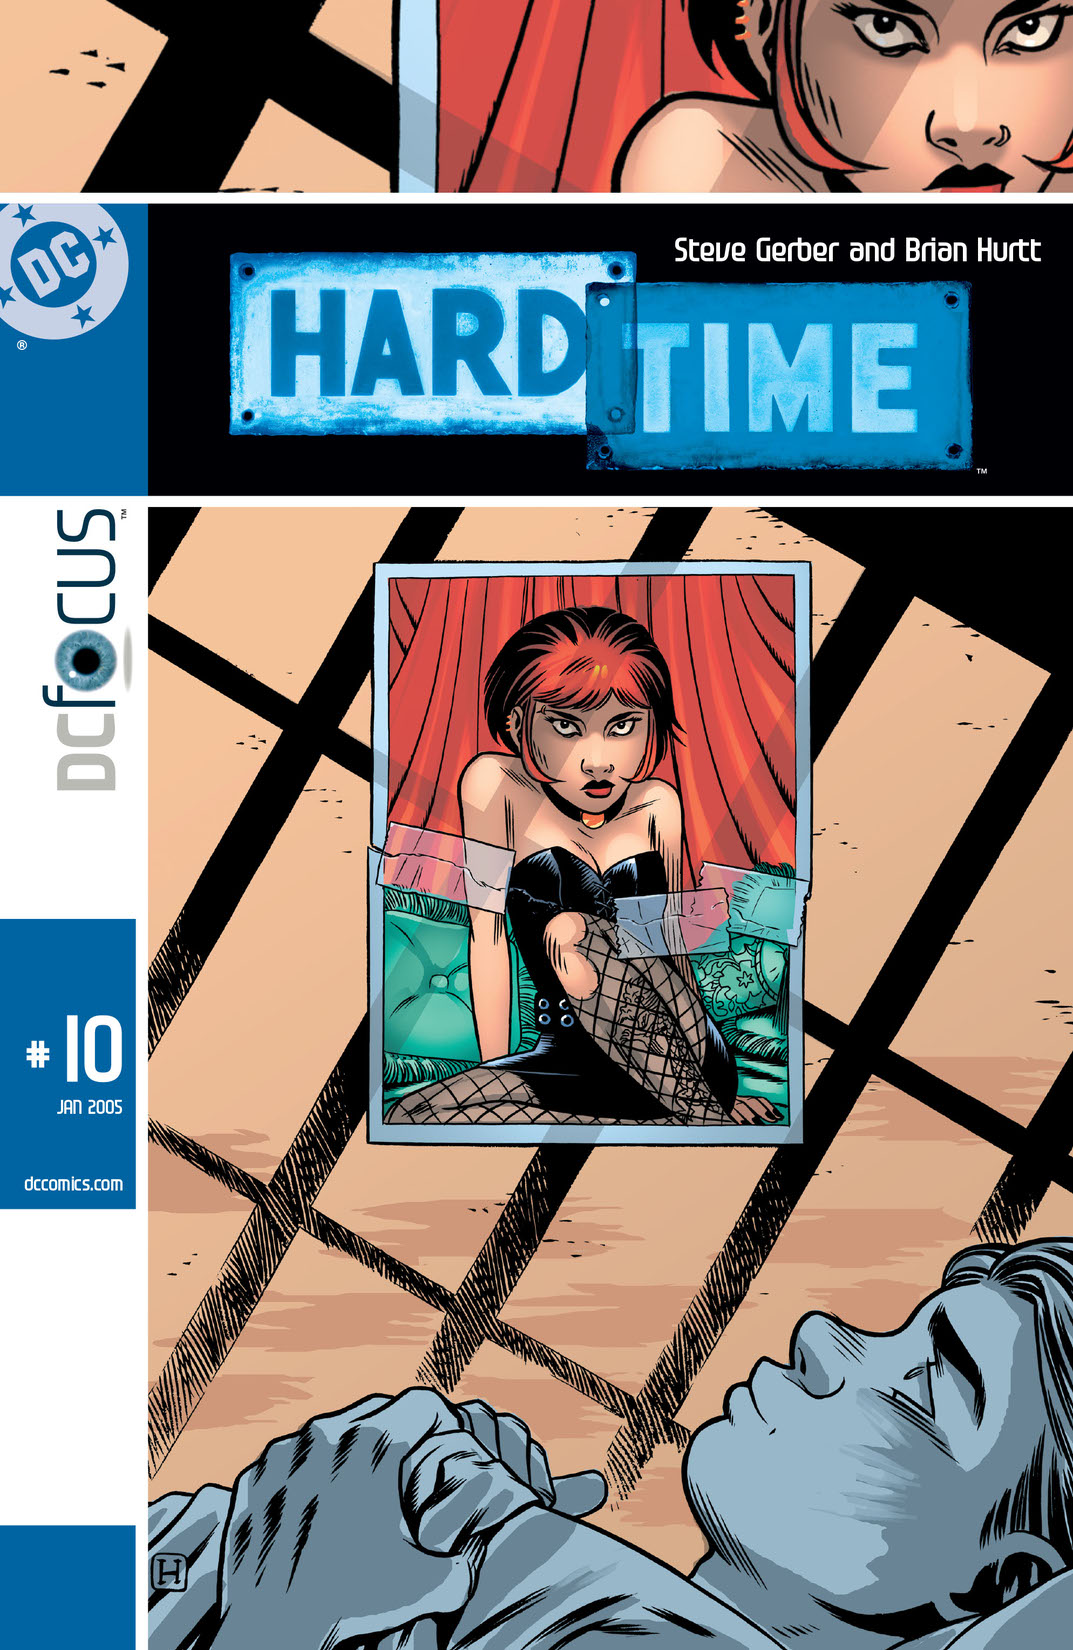 Hard Time #10 preview images